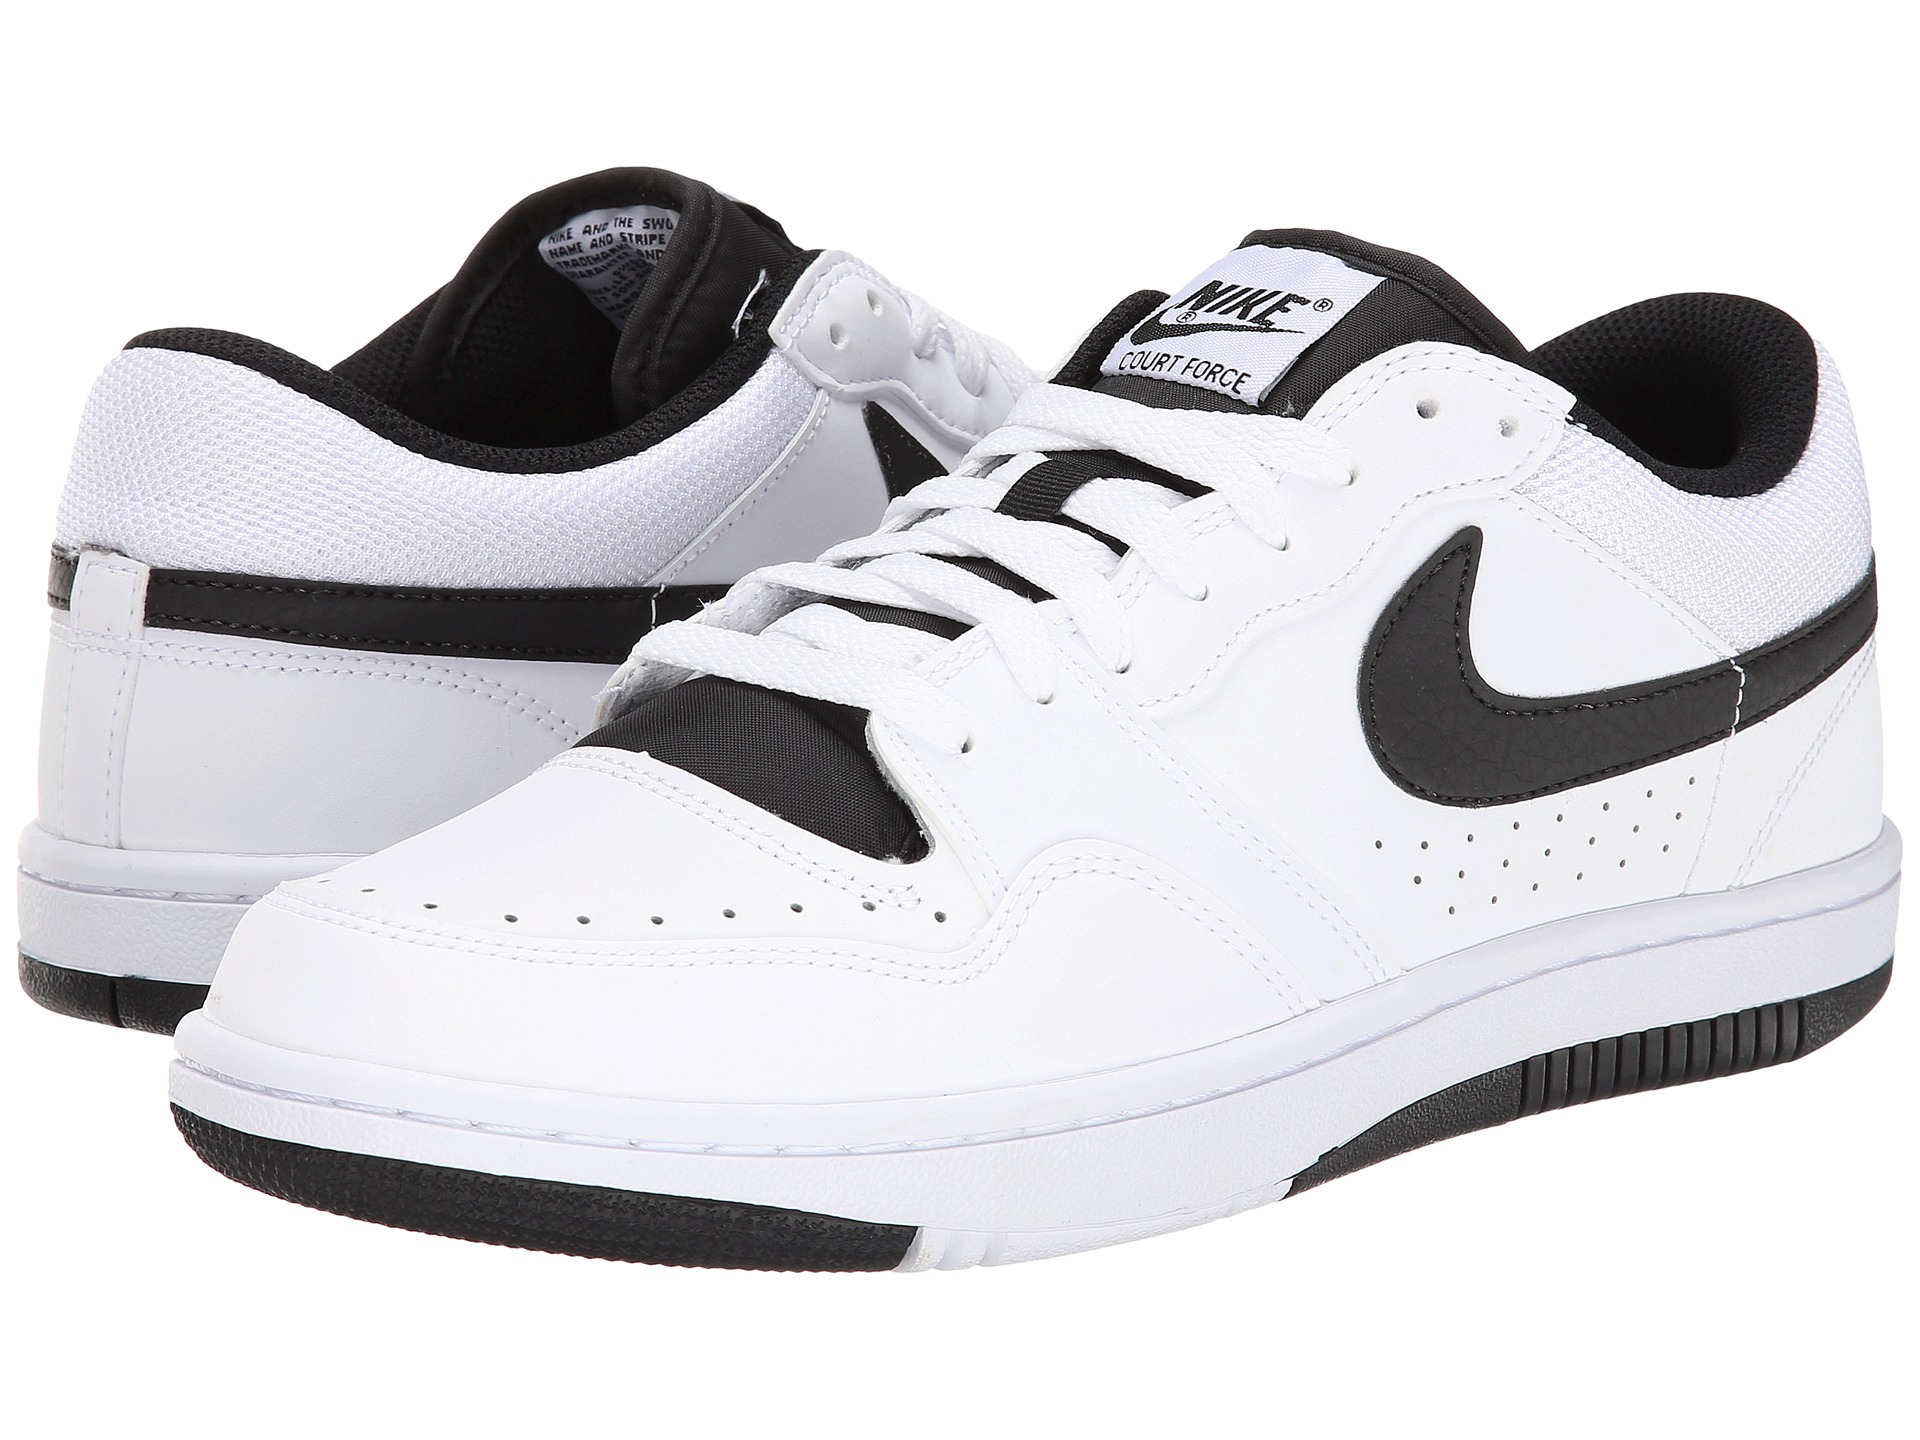 Nike Court Force Low in White/Black (White) - Lyst